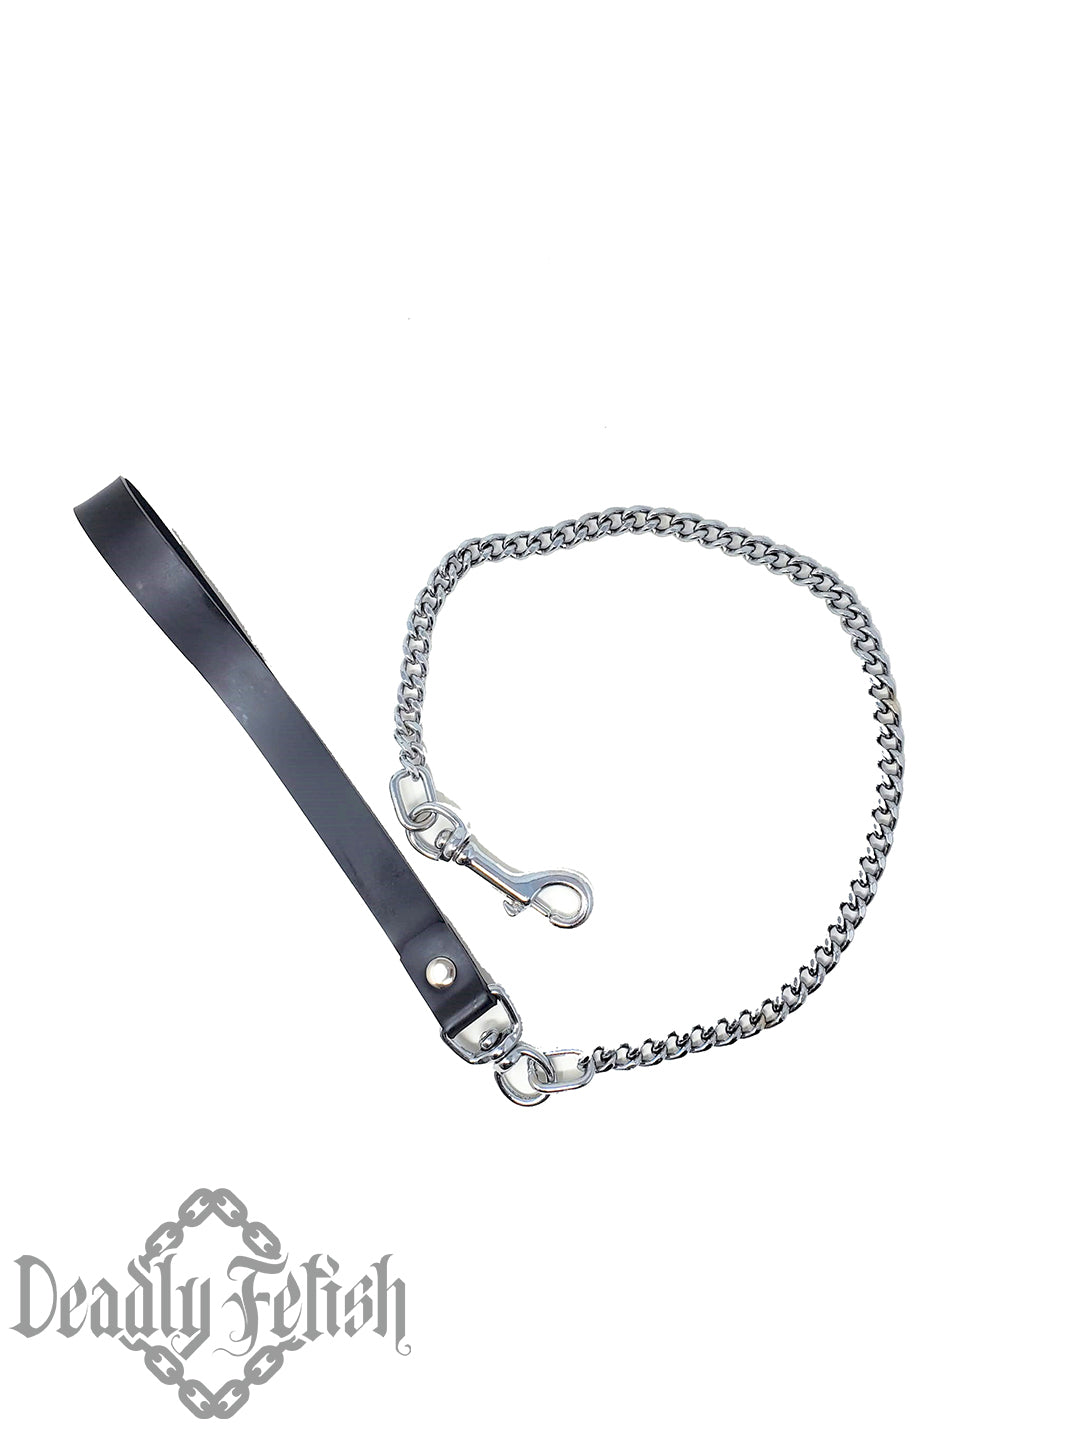 Deadly Fetish Latex: Latex and Chain Leash